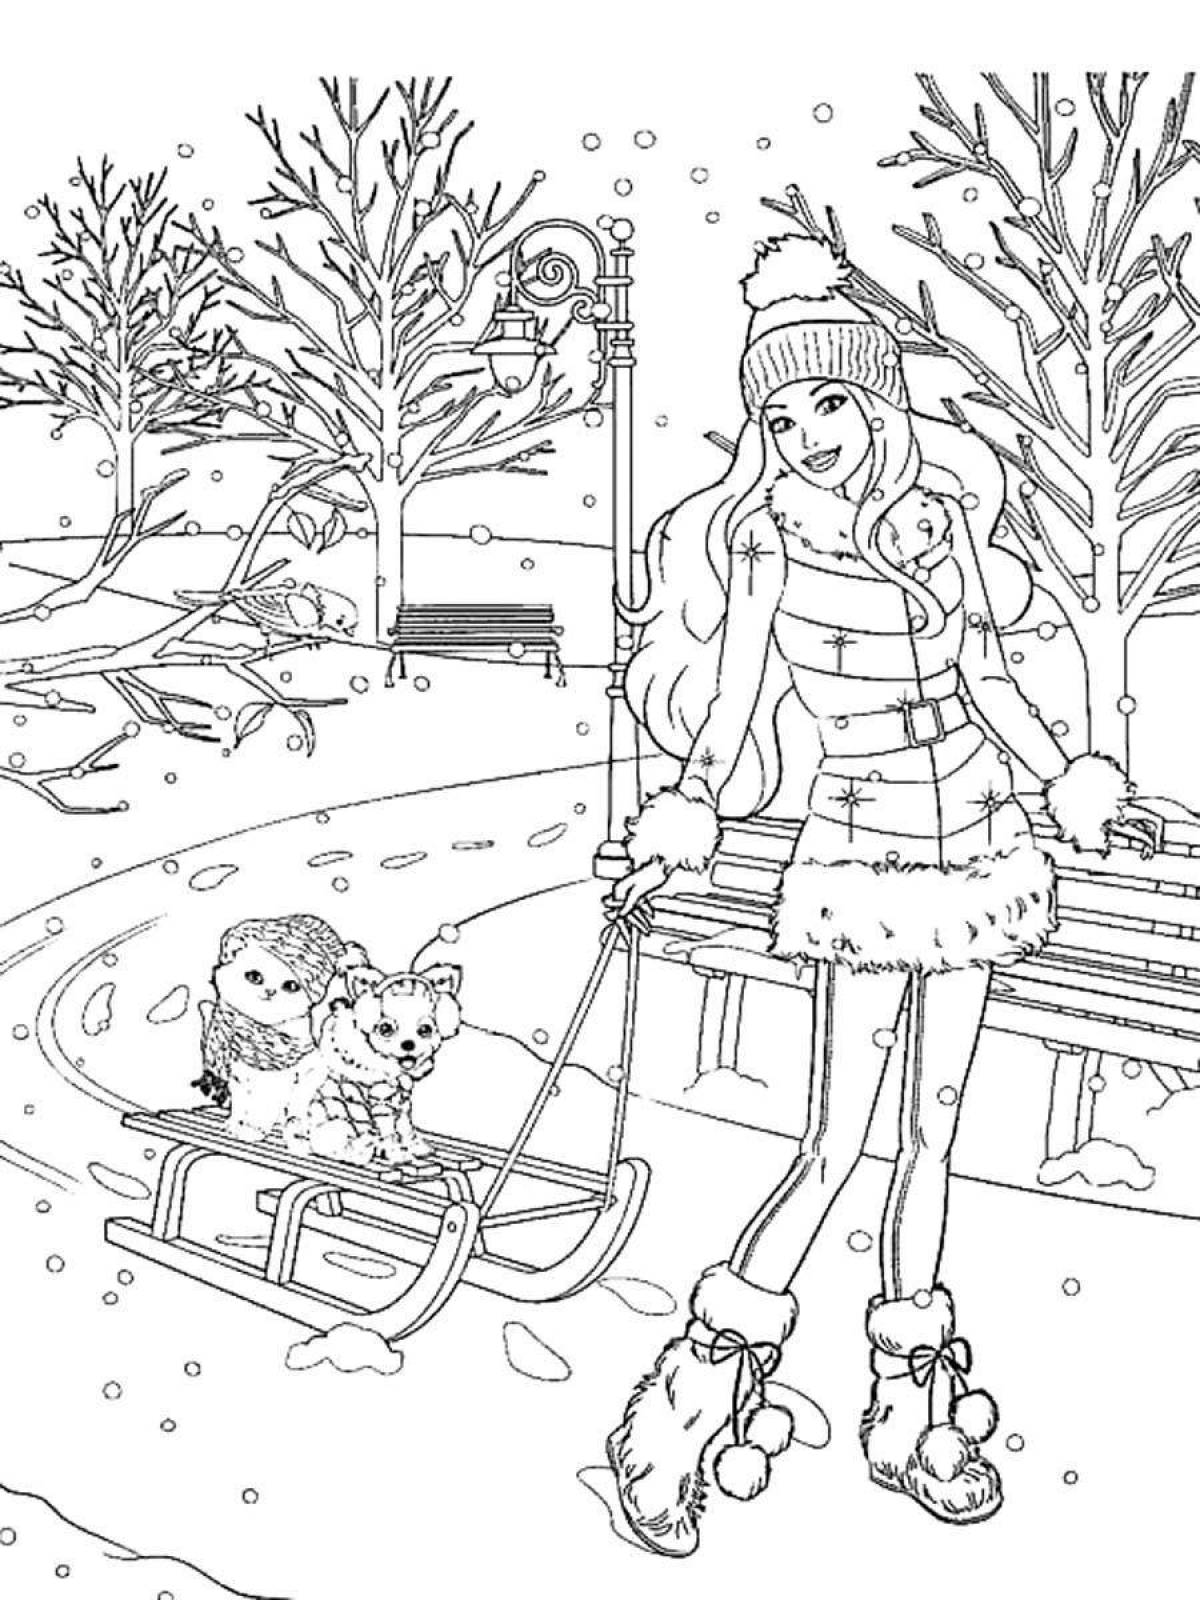 Barbie holiday family coloring book